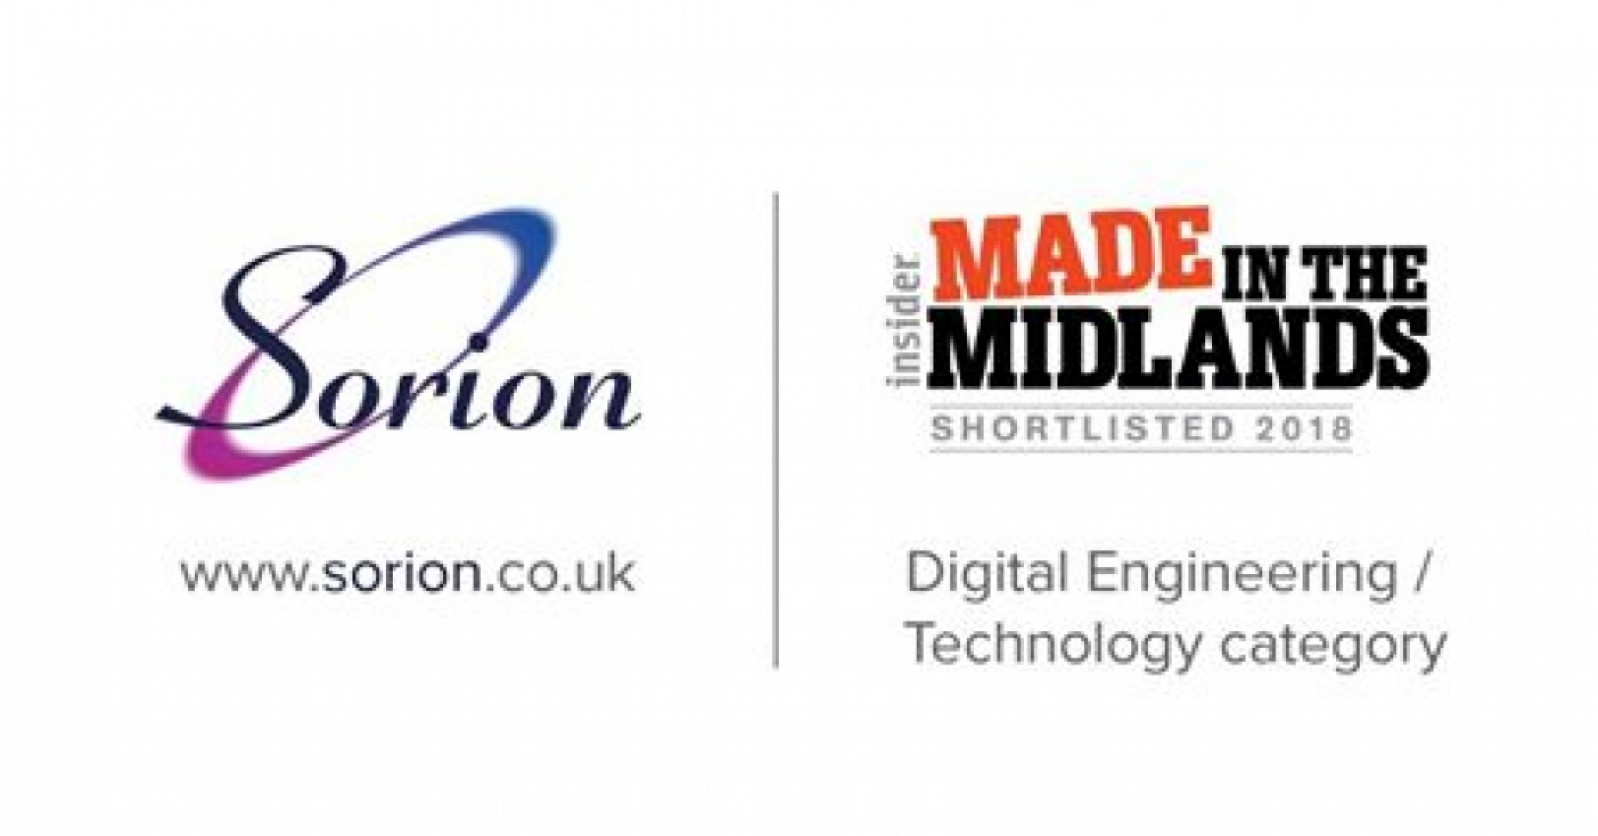 Sorion has been shortlisted for a Digital Engineer...